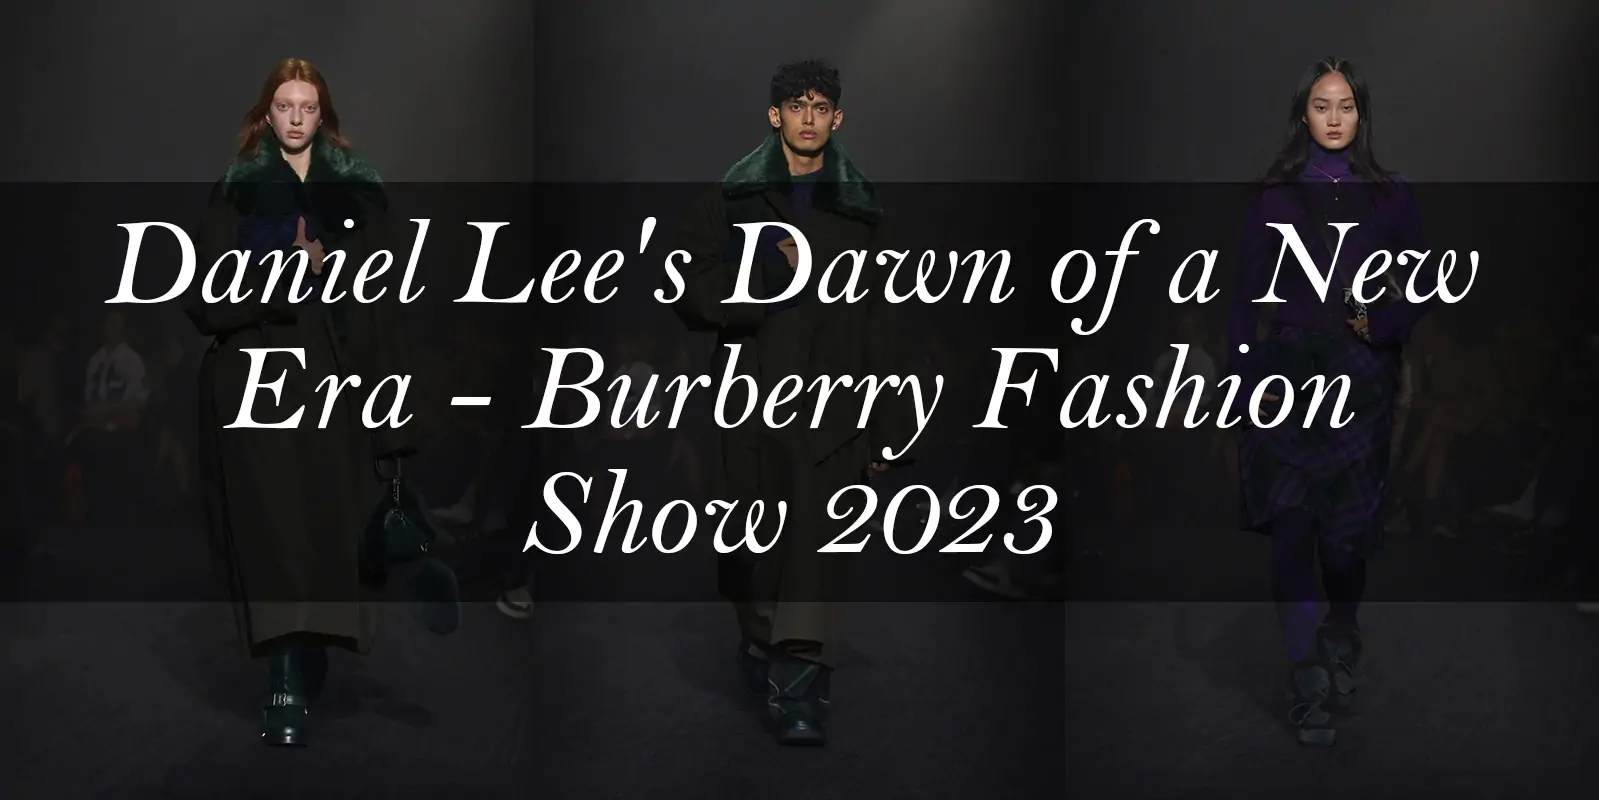 burberry fashion show 2023 Daniel Lee's Inaugural Collection Brings a New Era for Burberry SCARF.COM